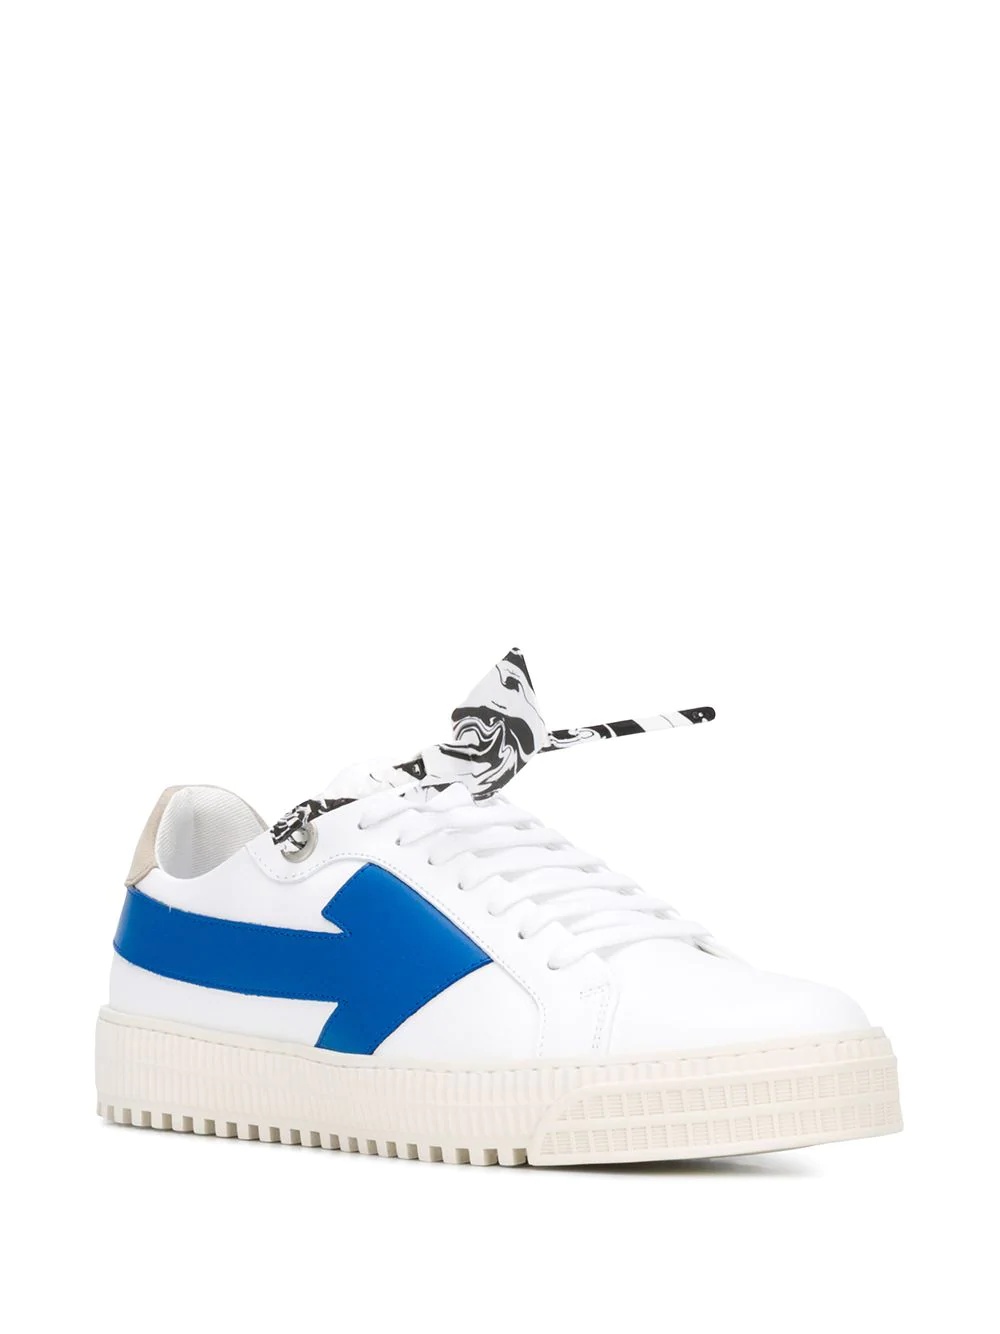 Off-White Arrows low-top sneakers | REVERSIBLE